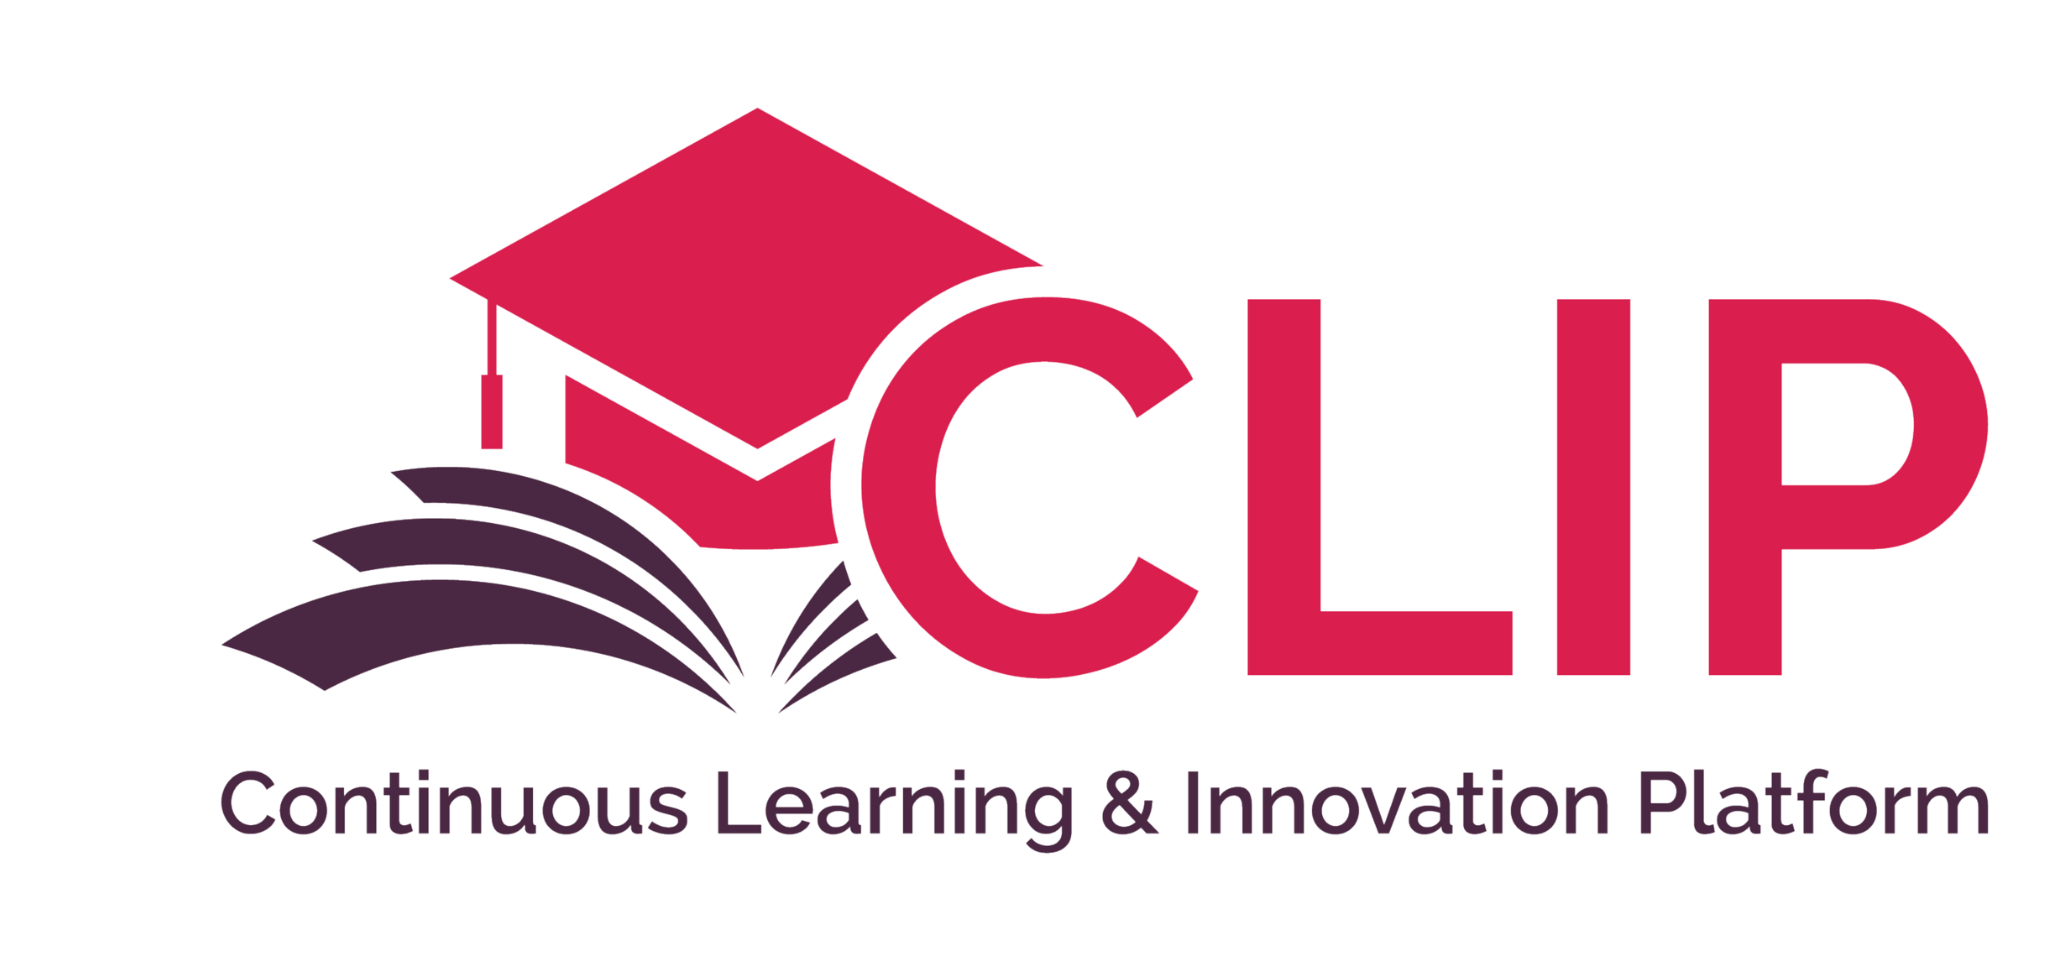 CONTINUOUS Learning & Innovation Platform